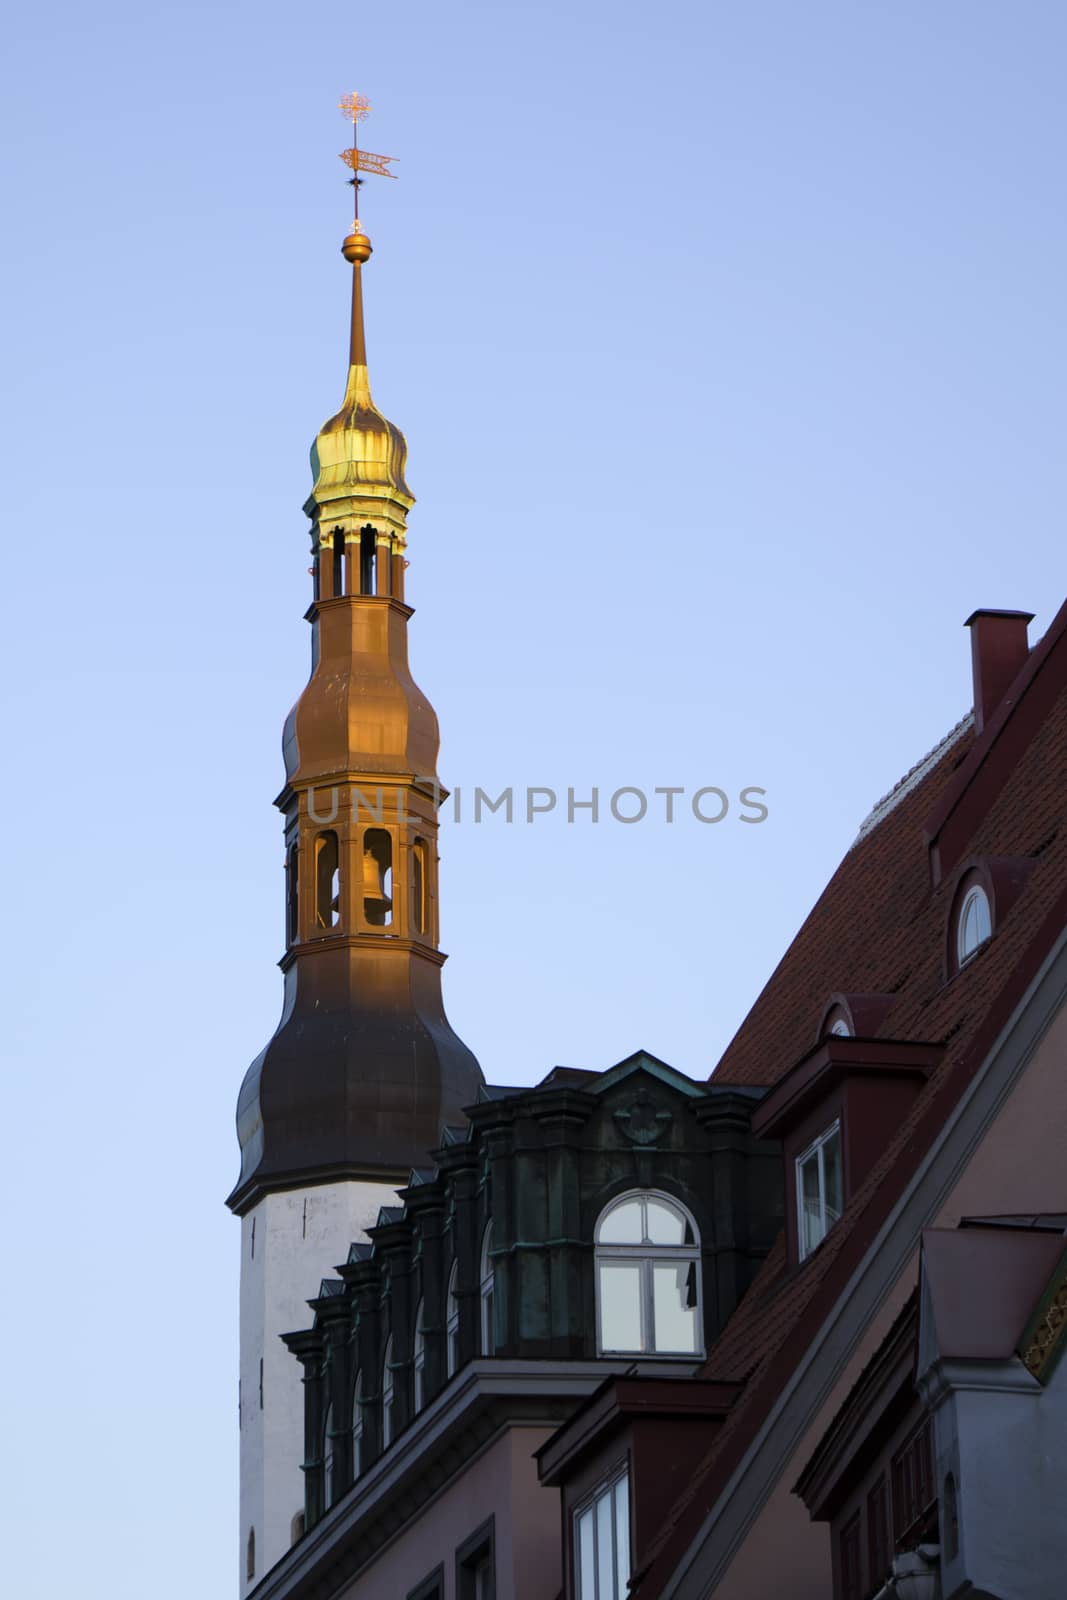 TALLINN, ESTONIA - OCTOBER 20, 2017: Buildings and architecture exterior view in old town of Tallinn, colorful old style houses roofs.